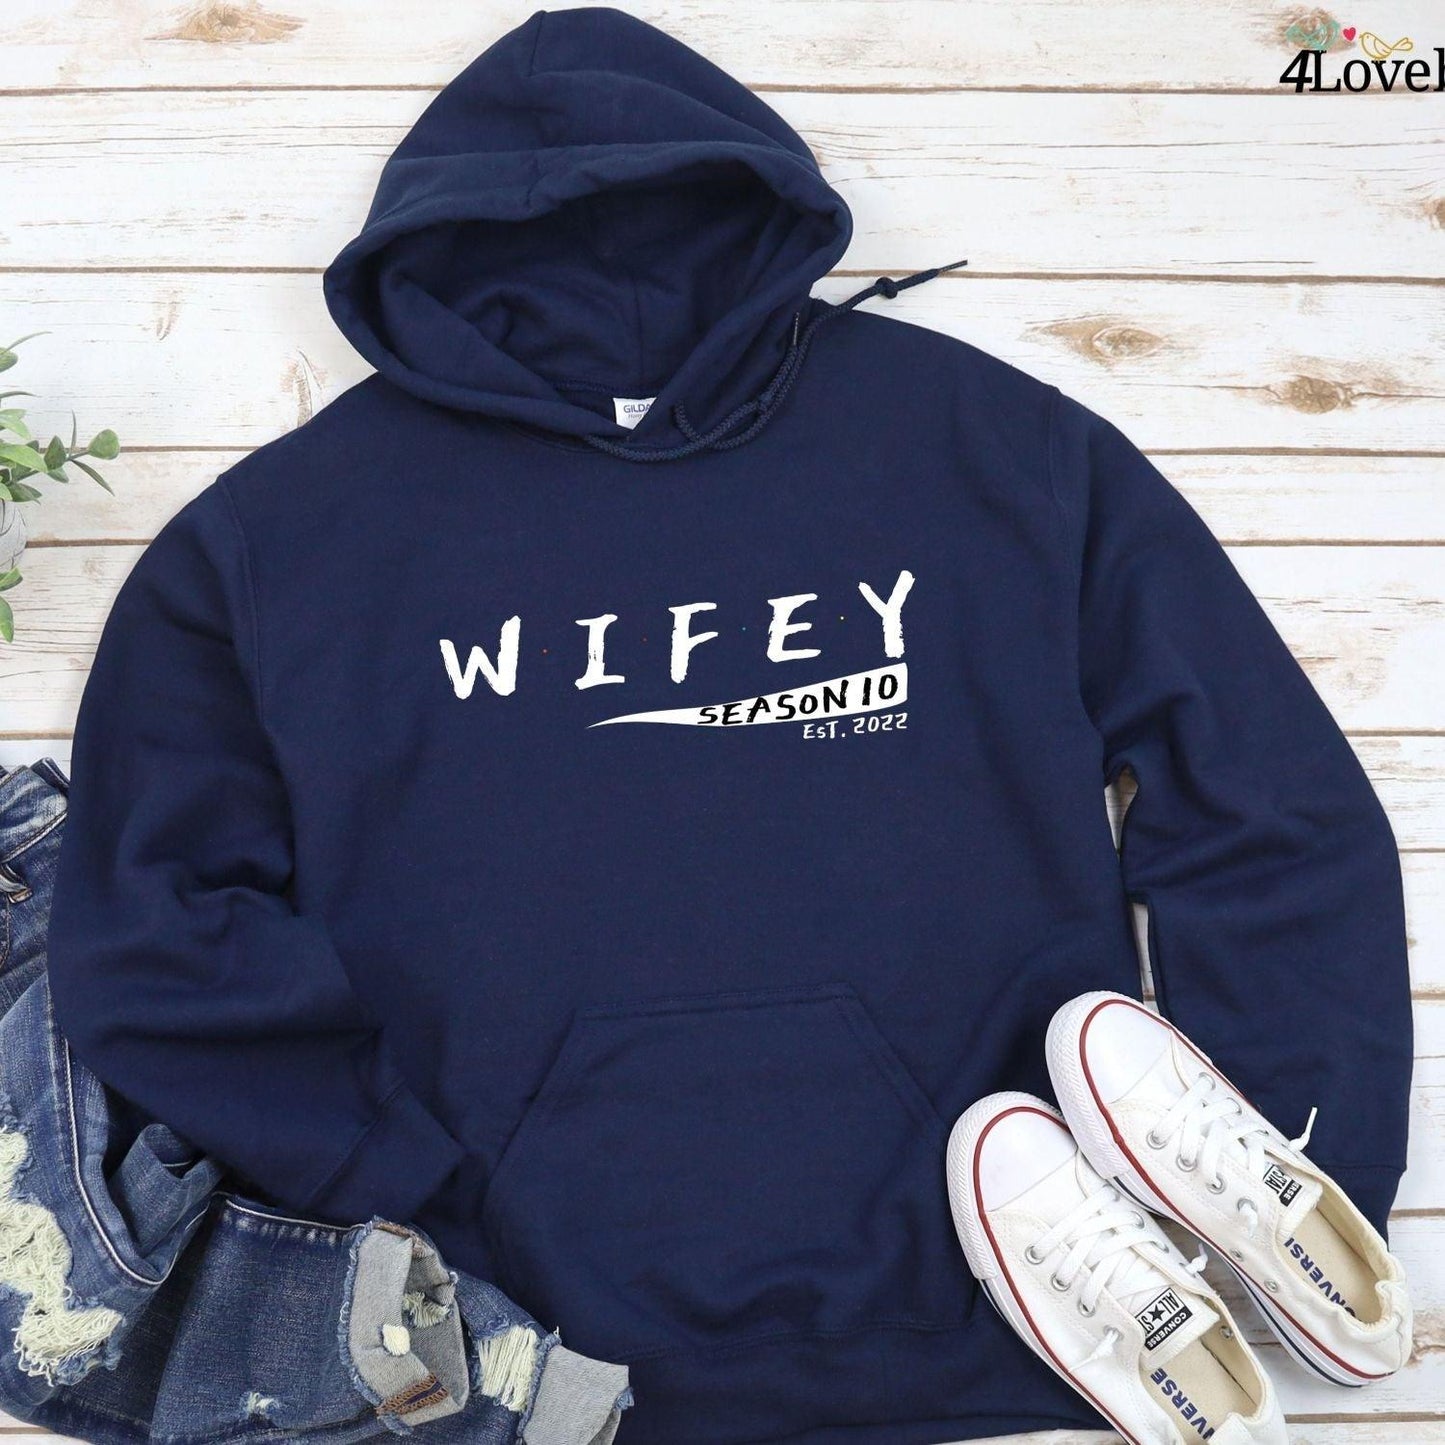 Hubby & Wifey Anniversary Custom Matching Outfits - Perfect Gifts for Couples, Valentine's Day, and Married Duo! - 4Lovebirds